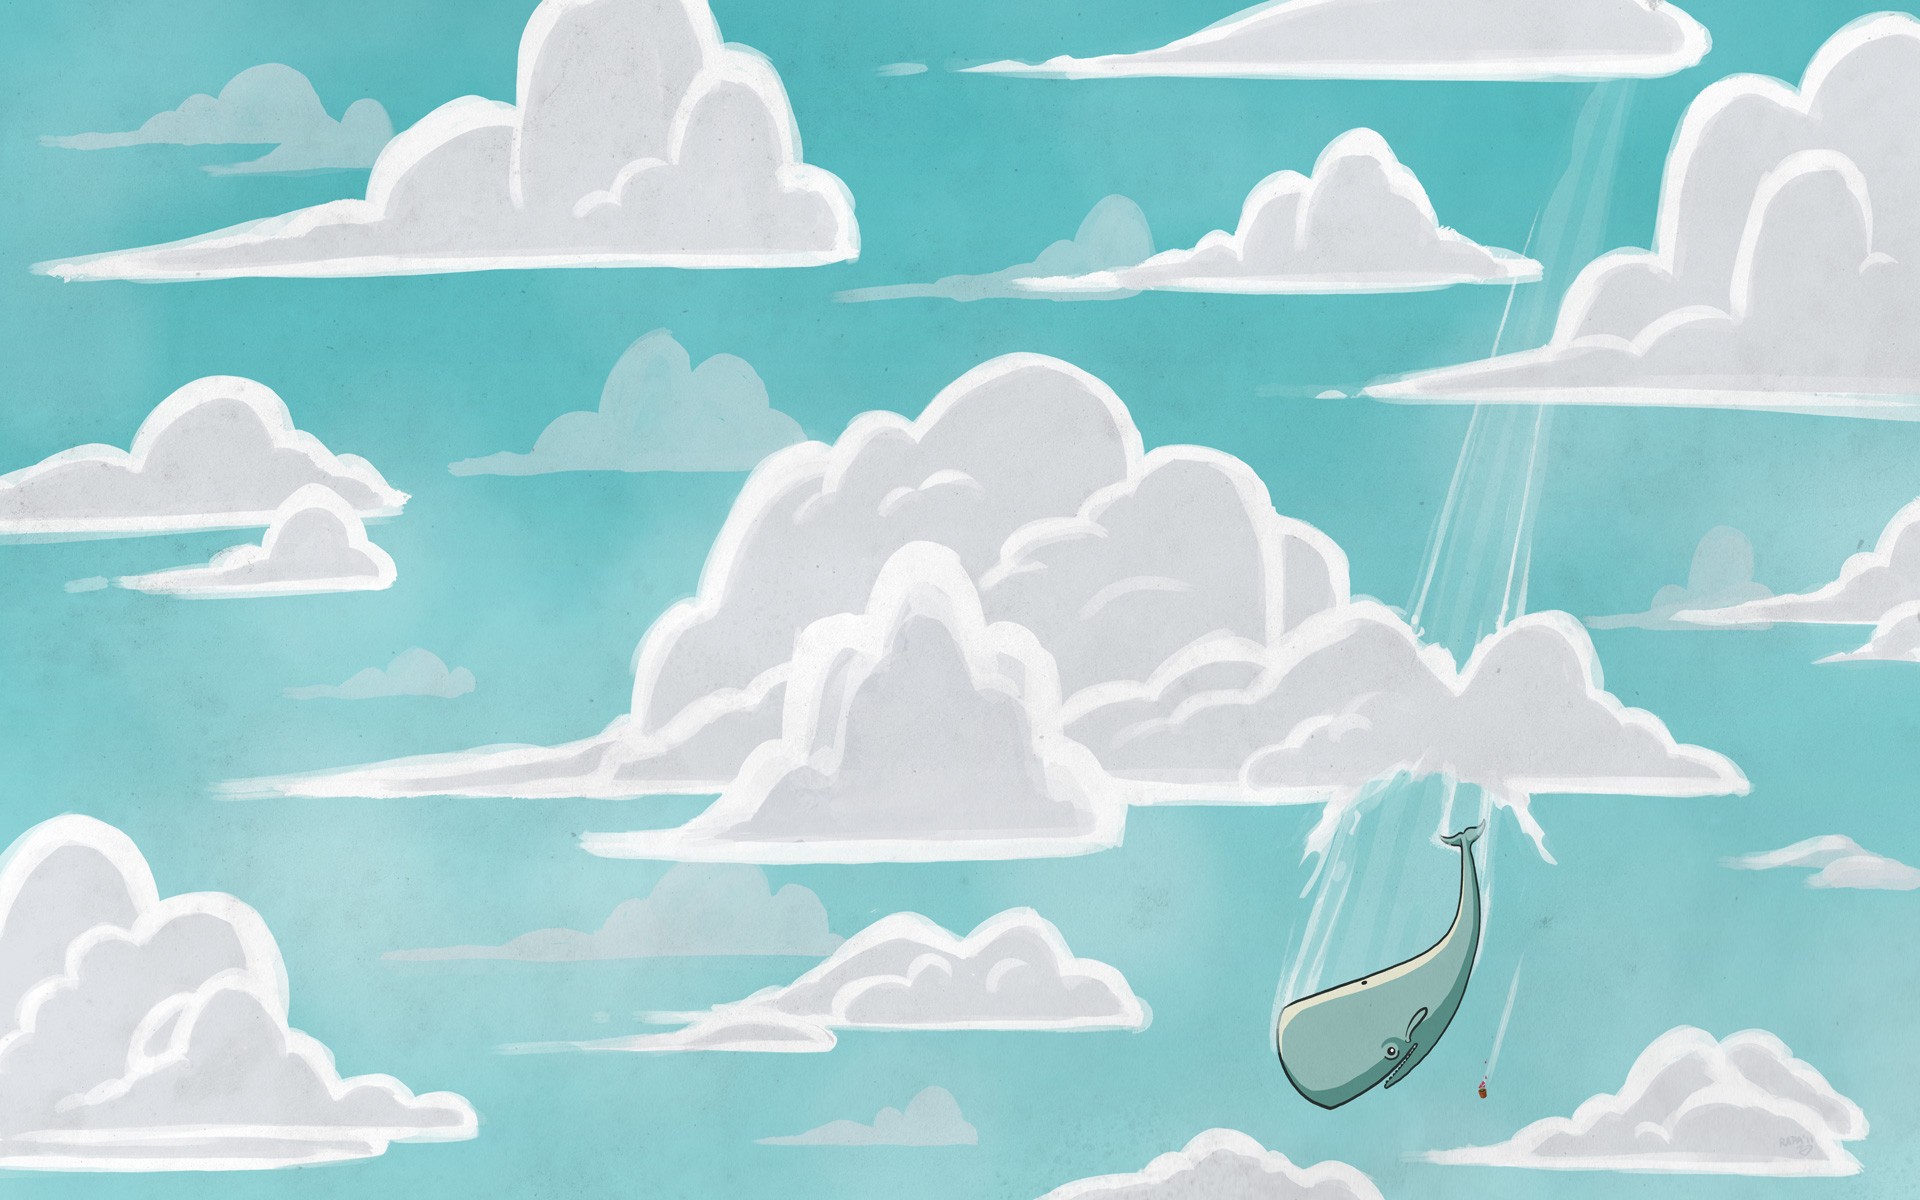 General 1920x1200 digital art illustration nature flying whale clouds sky flowerpot falling The Hitchhiker's Guide to the Galaxy animals mammals artwork